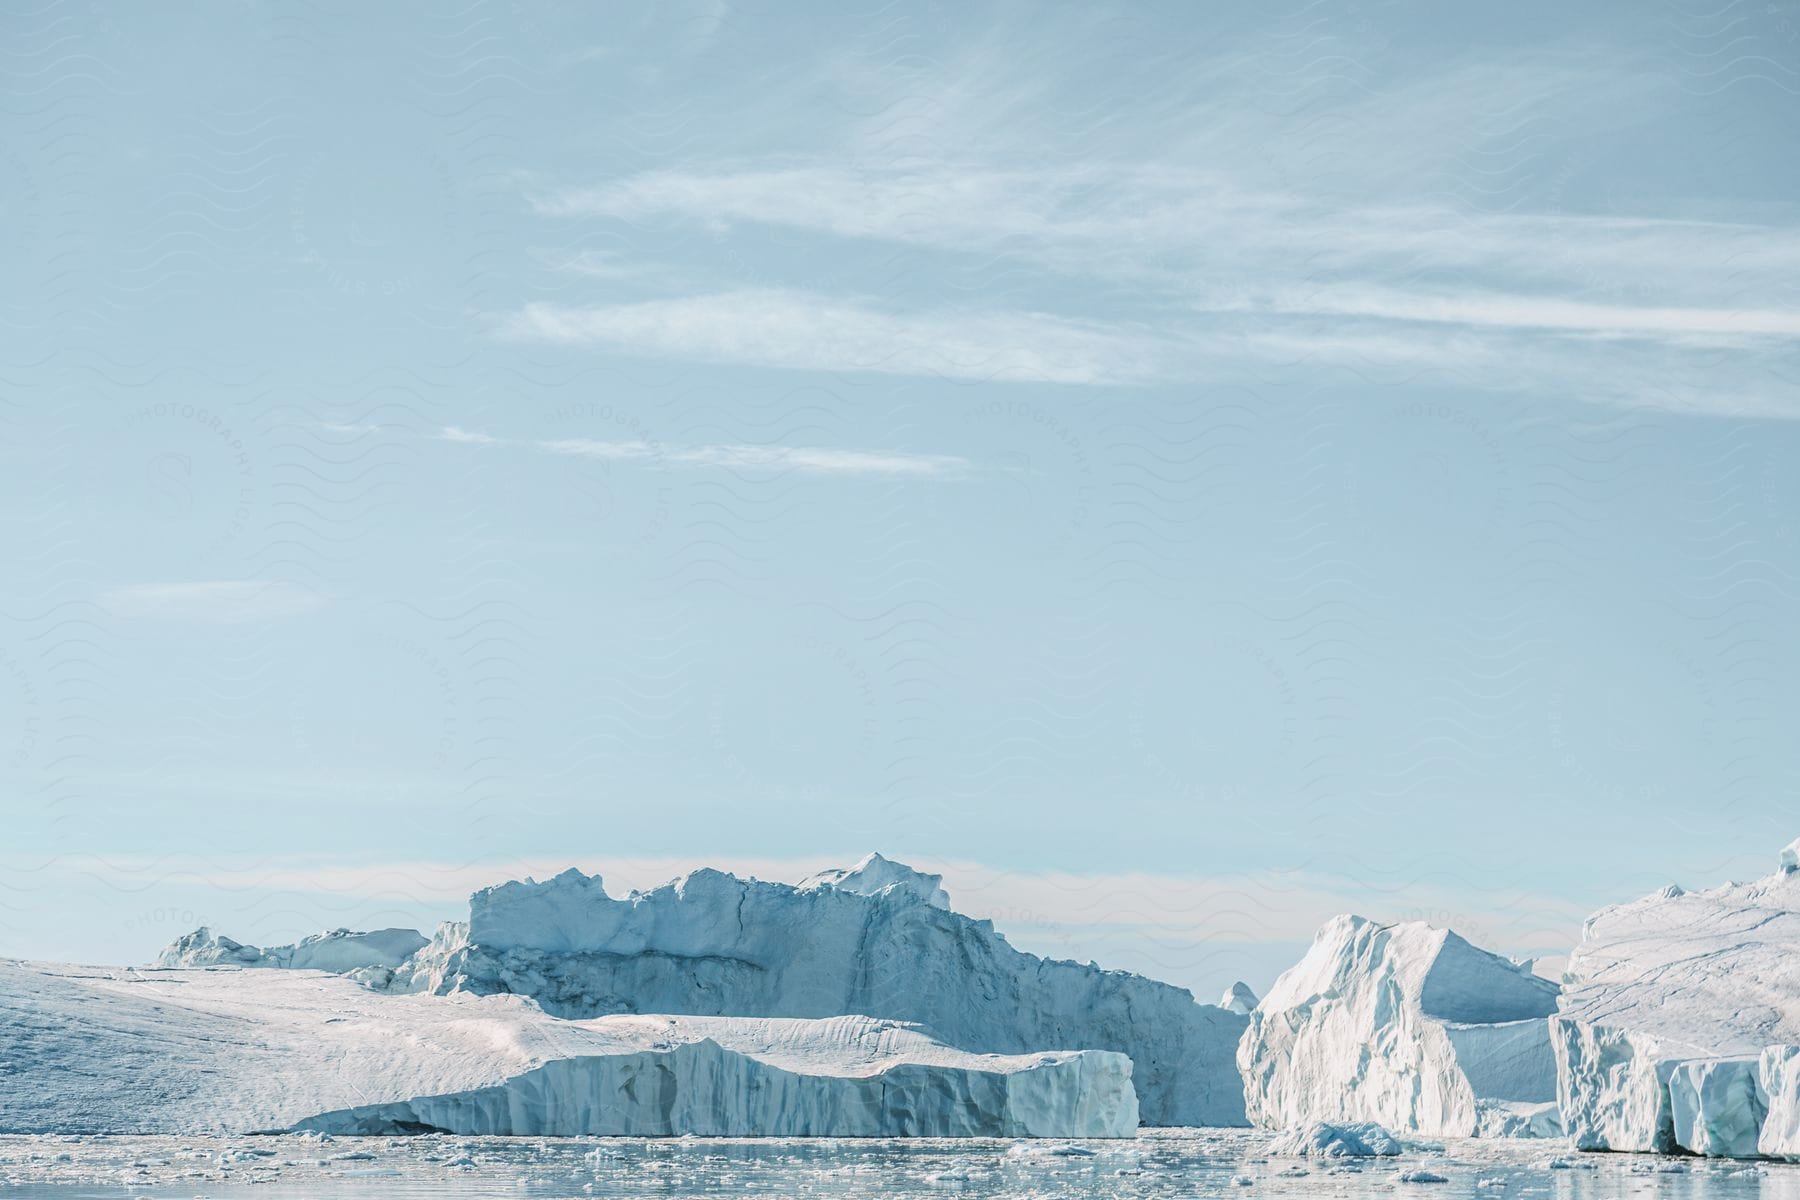 Glacier and ice water landscape in greenland